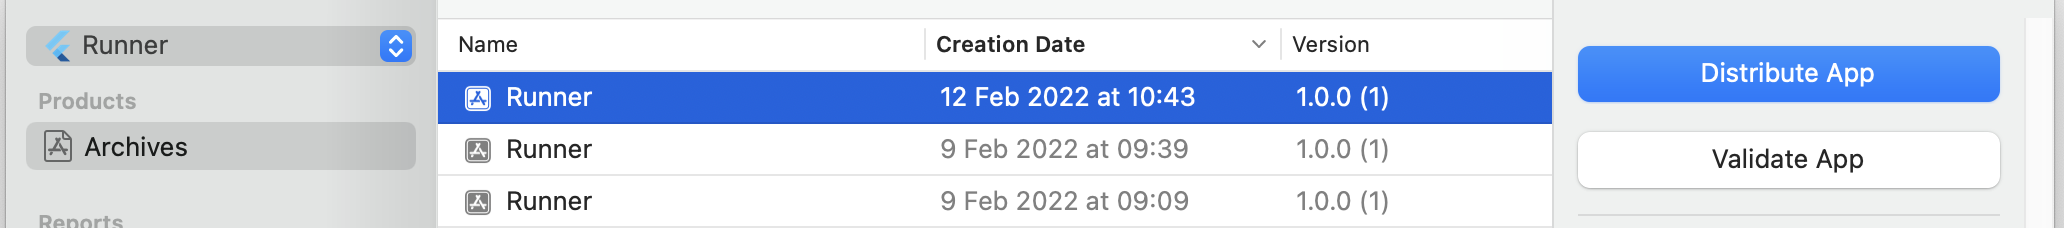 How easy creating a macOS app with Flutter is in 2022?